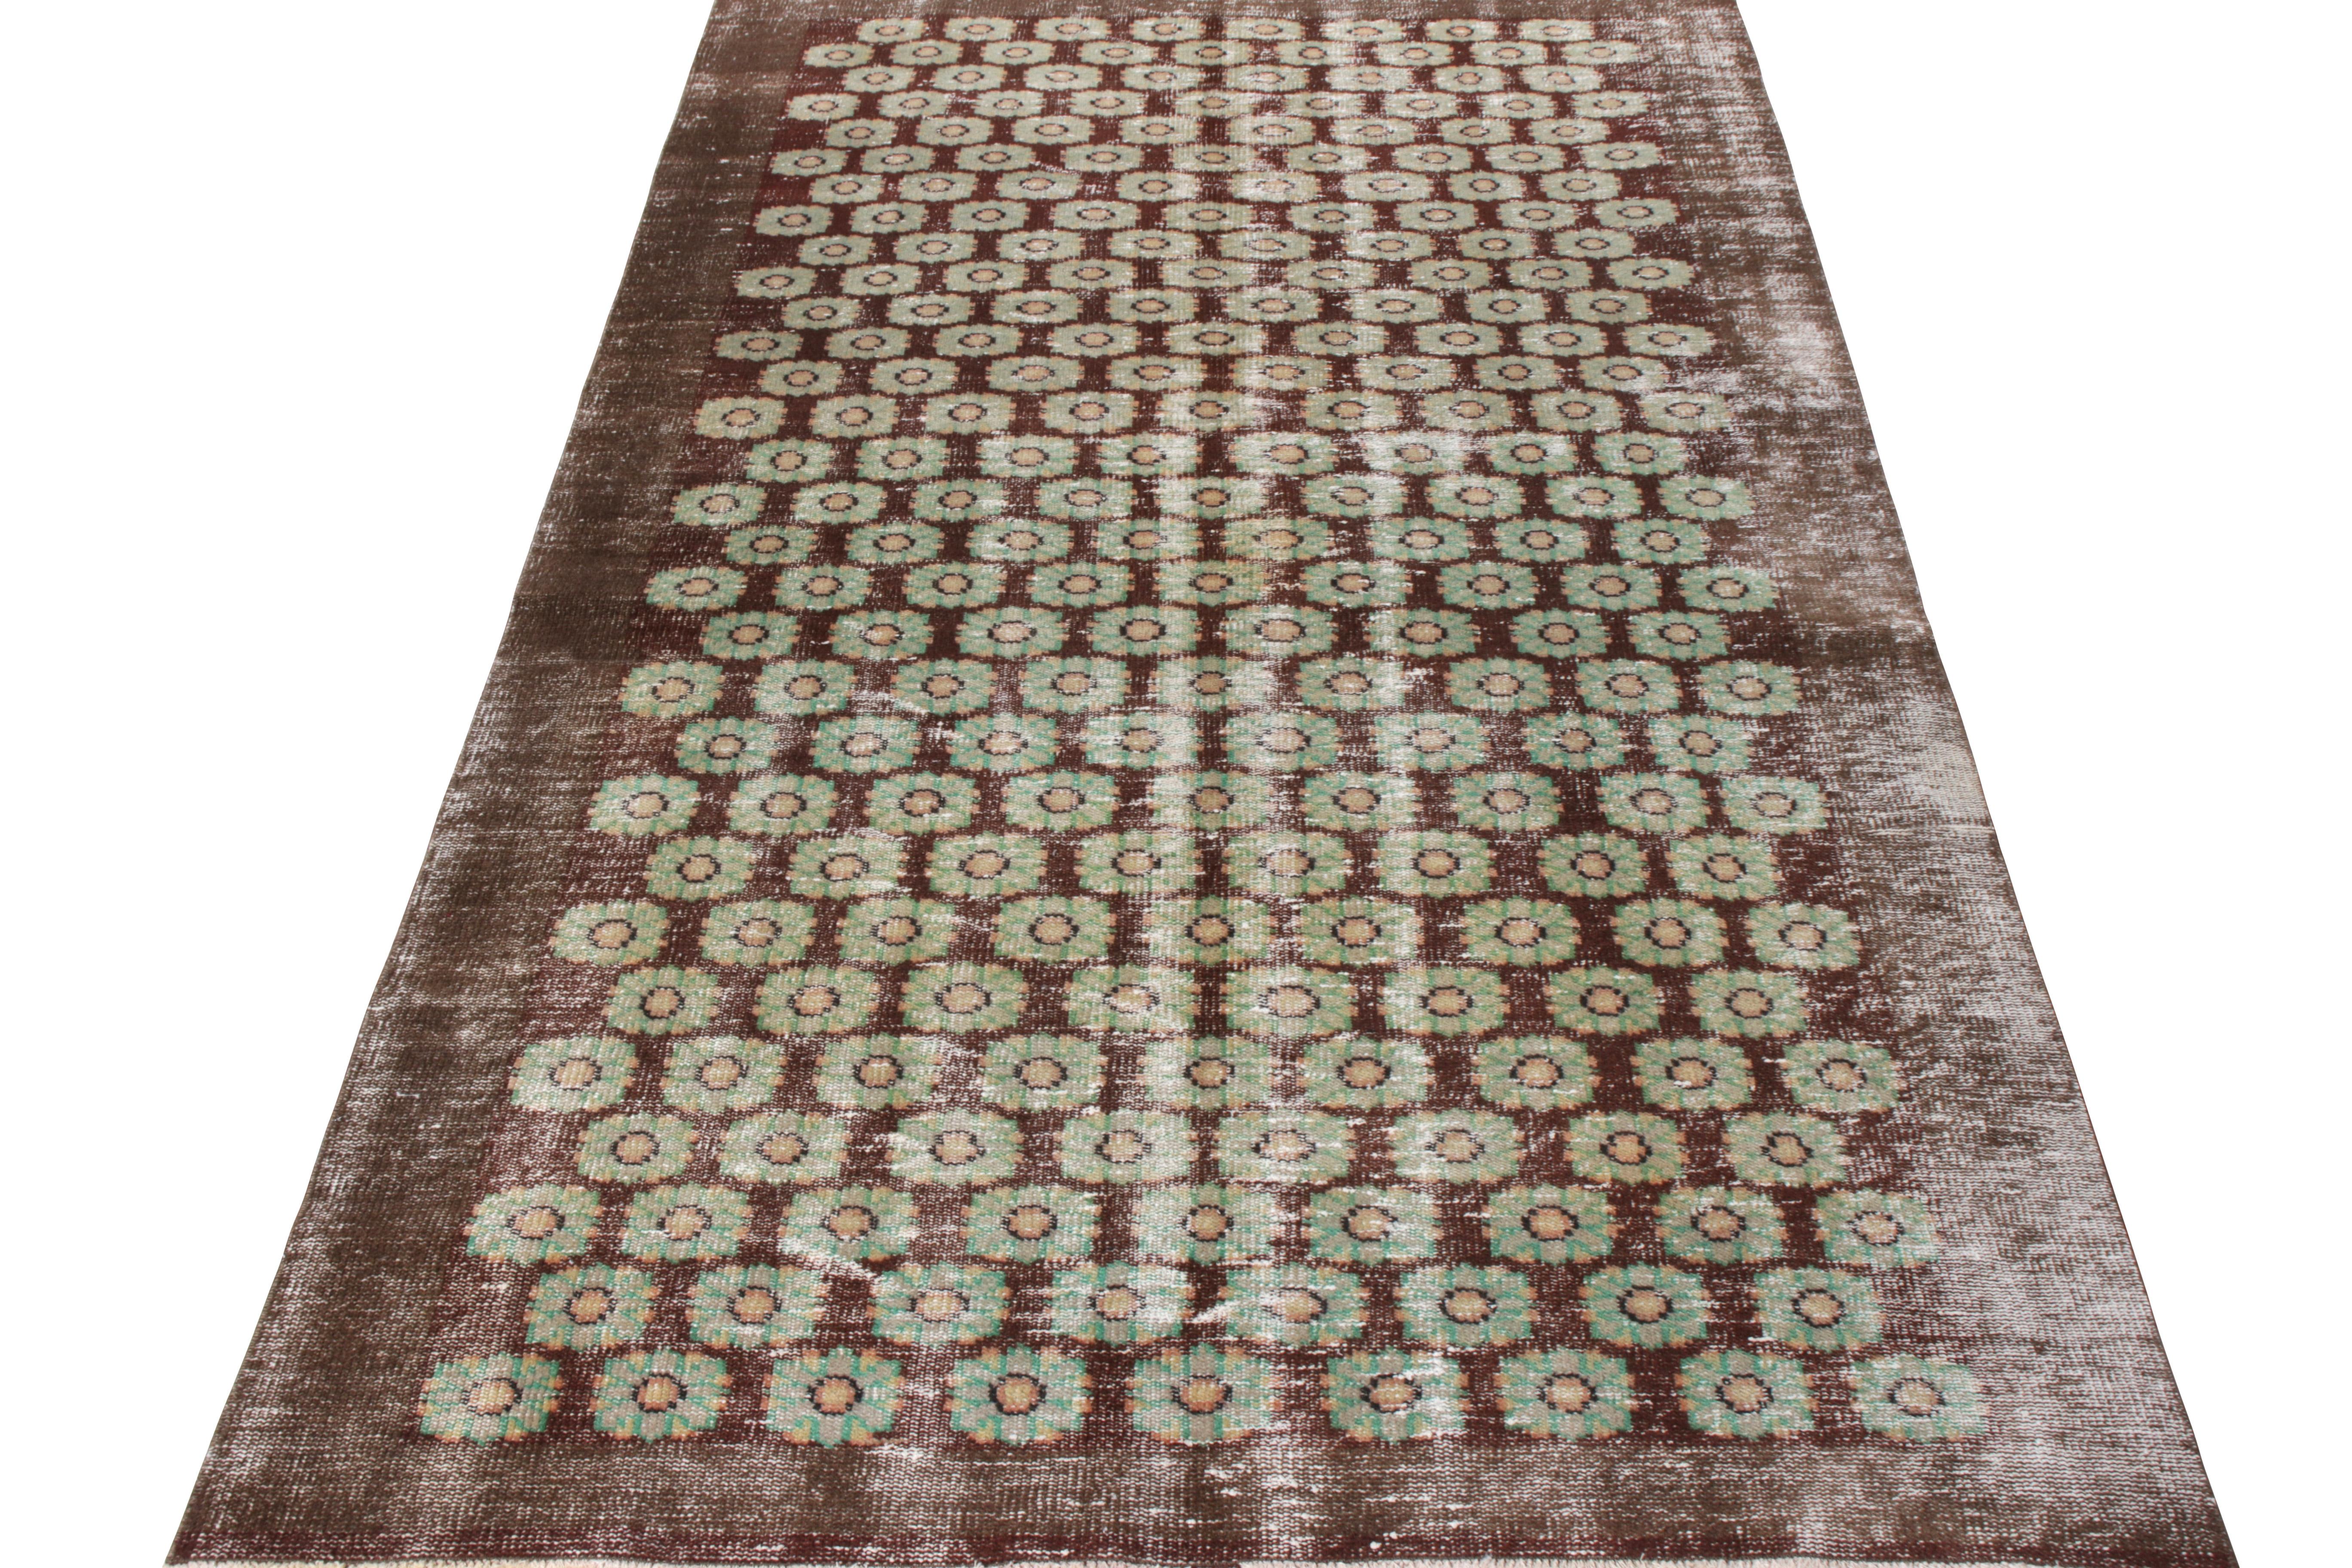 Finely hand-knotted in Turkey originating between 1960-1970, this vintage mid-century rug belongs to Rug & Kilim’s Mid-Century Pasha Collection that celebrates the Turkish icon and multidisciplinary designer Zeki Müren with Josh’s hand picked